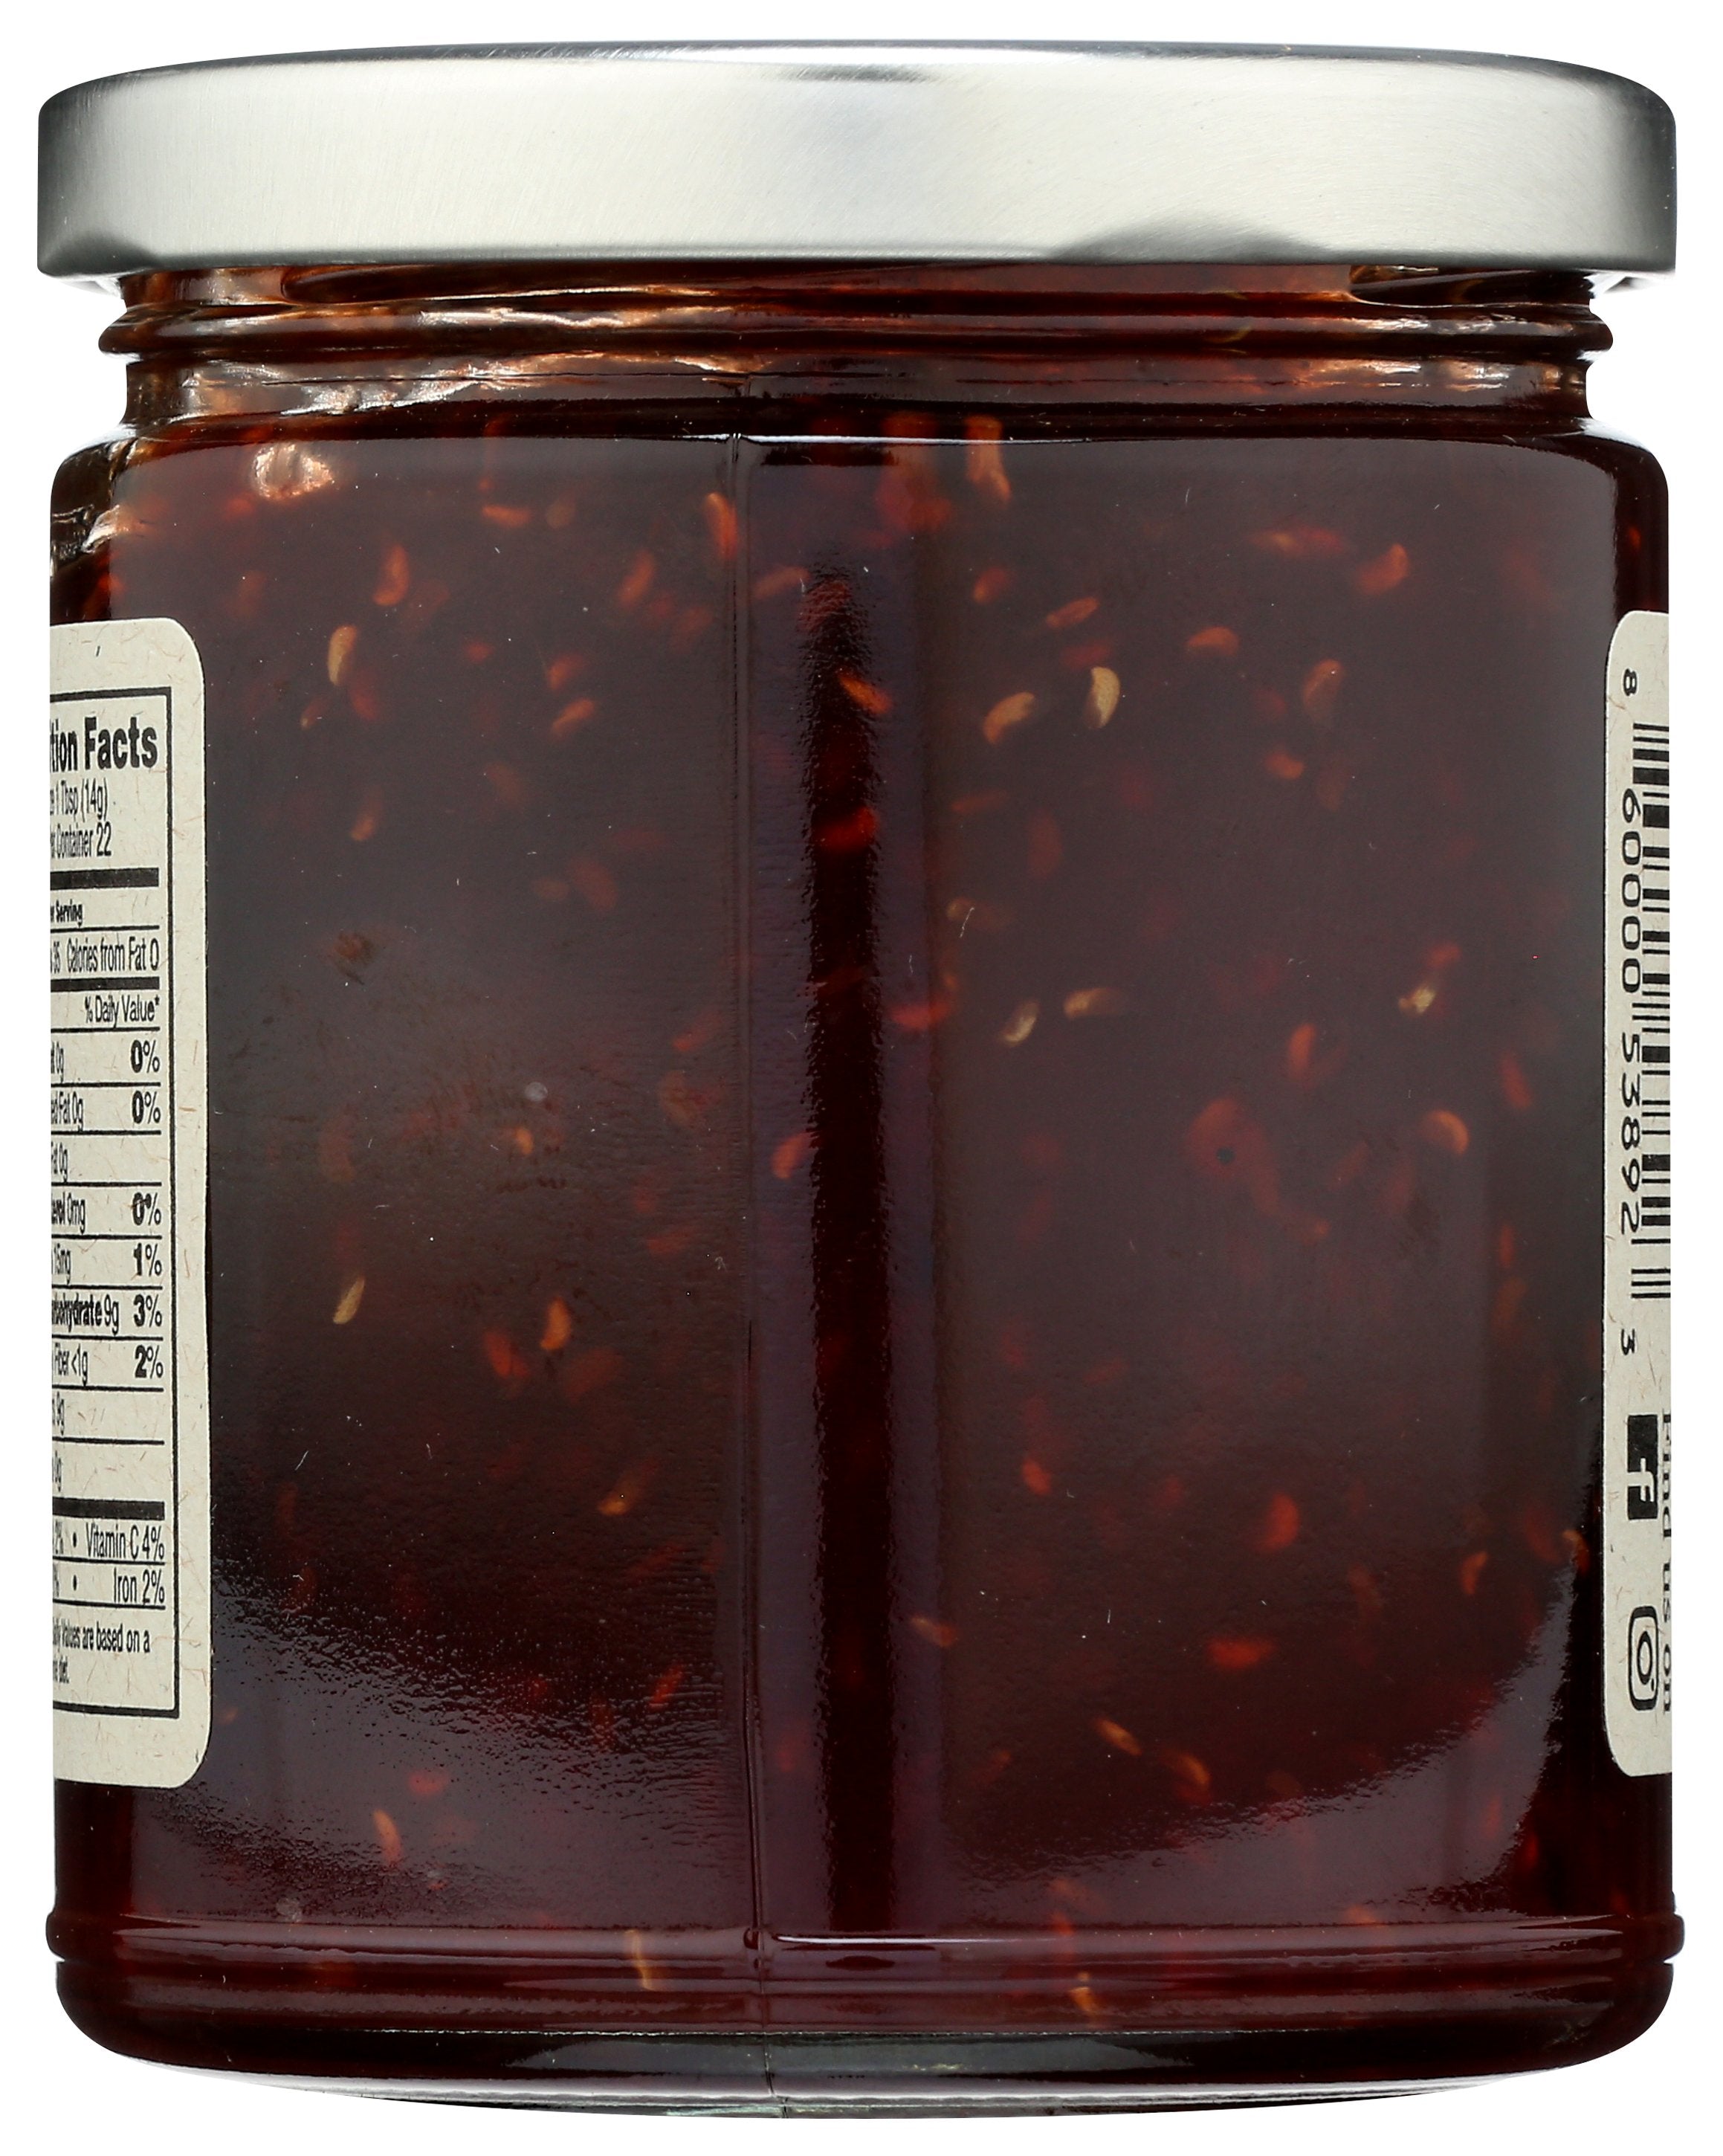 SOUTHERN ROOTS SISTERS JAM RASPBERRY CHIPOTLE - Case of 6